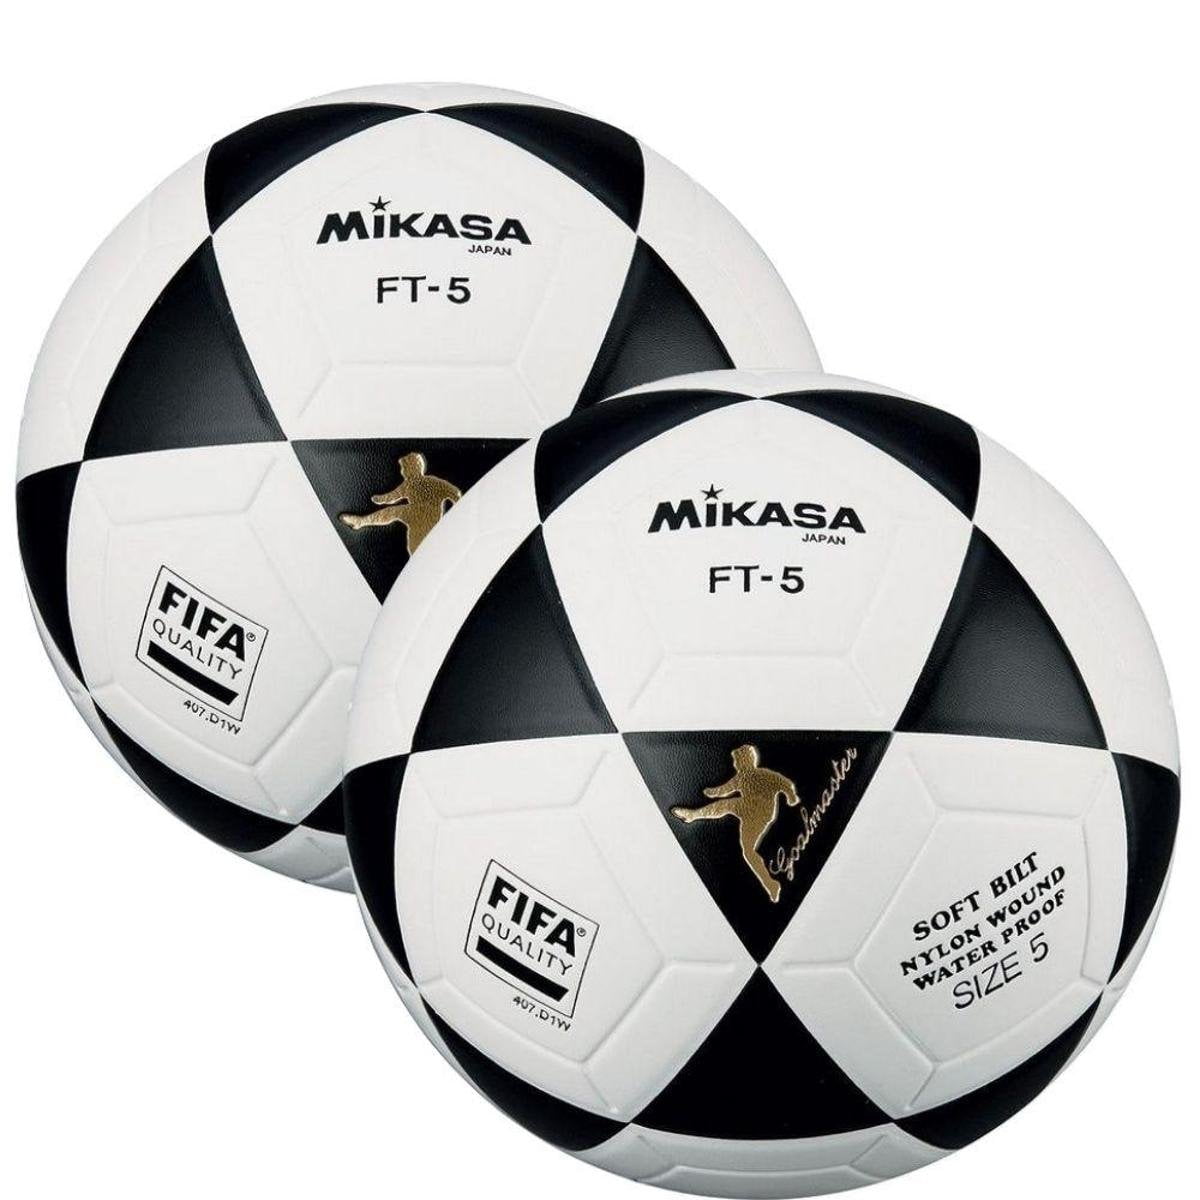 Mikasa 4-Inch Mini Promotional Water Polo Ball Soft Cover-Yellow